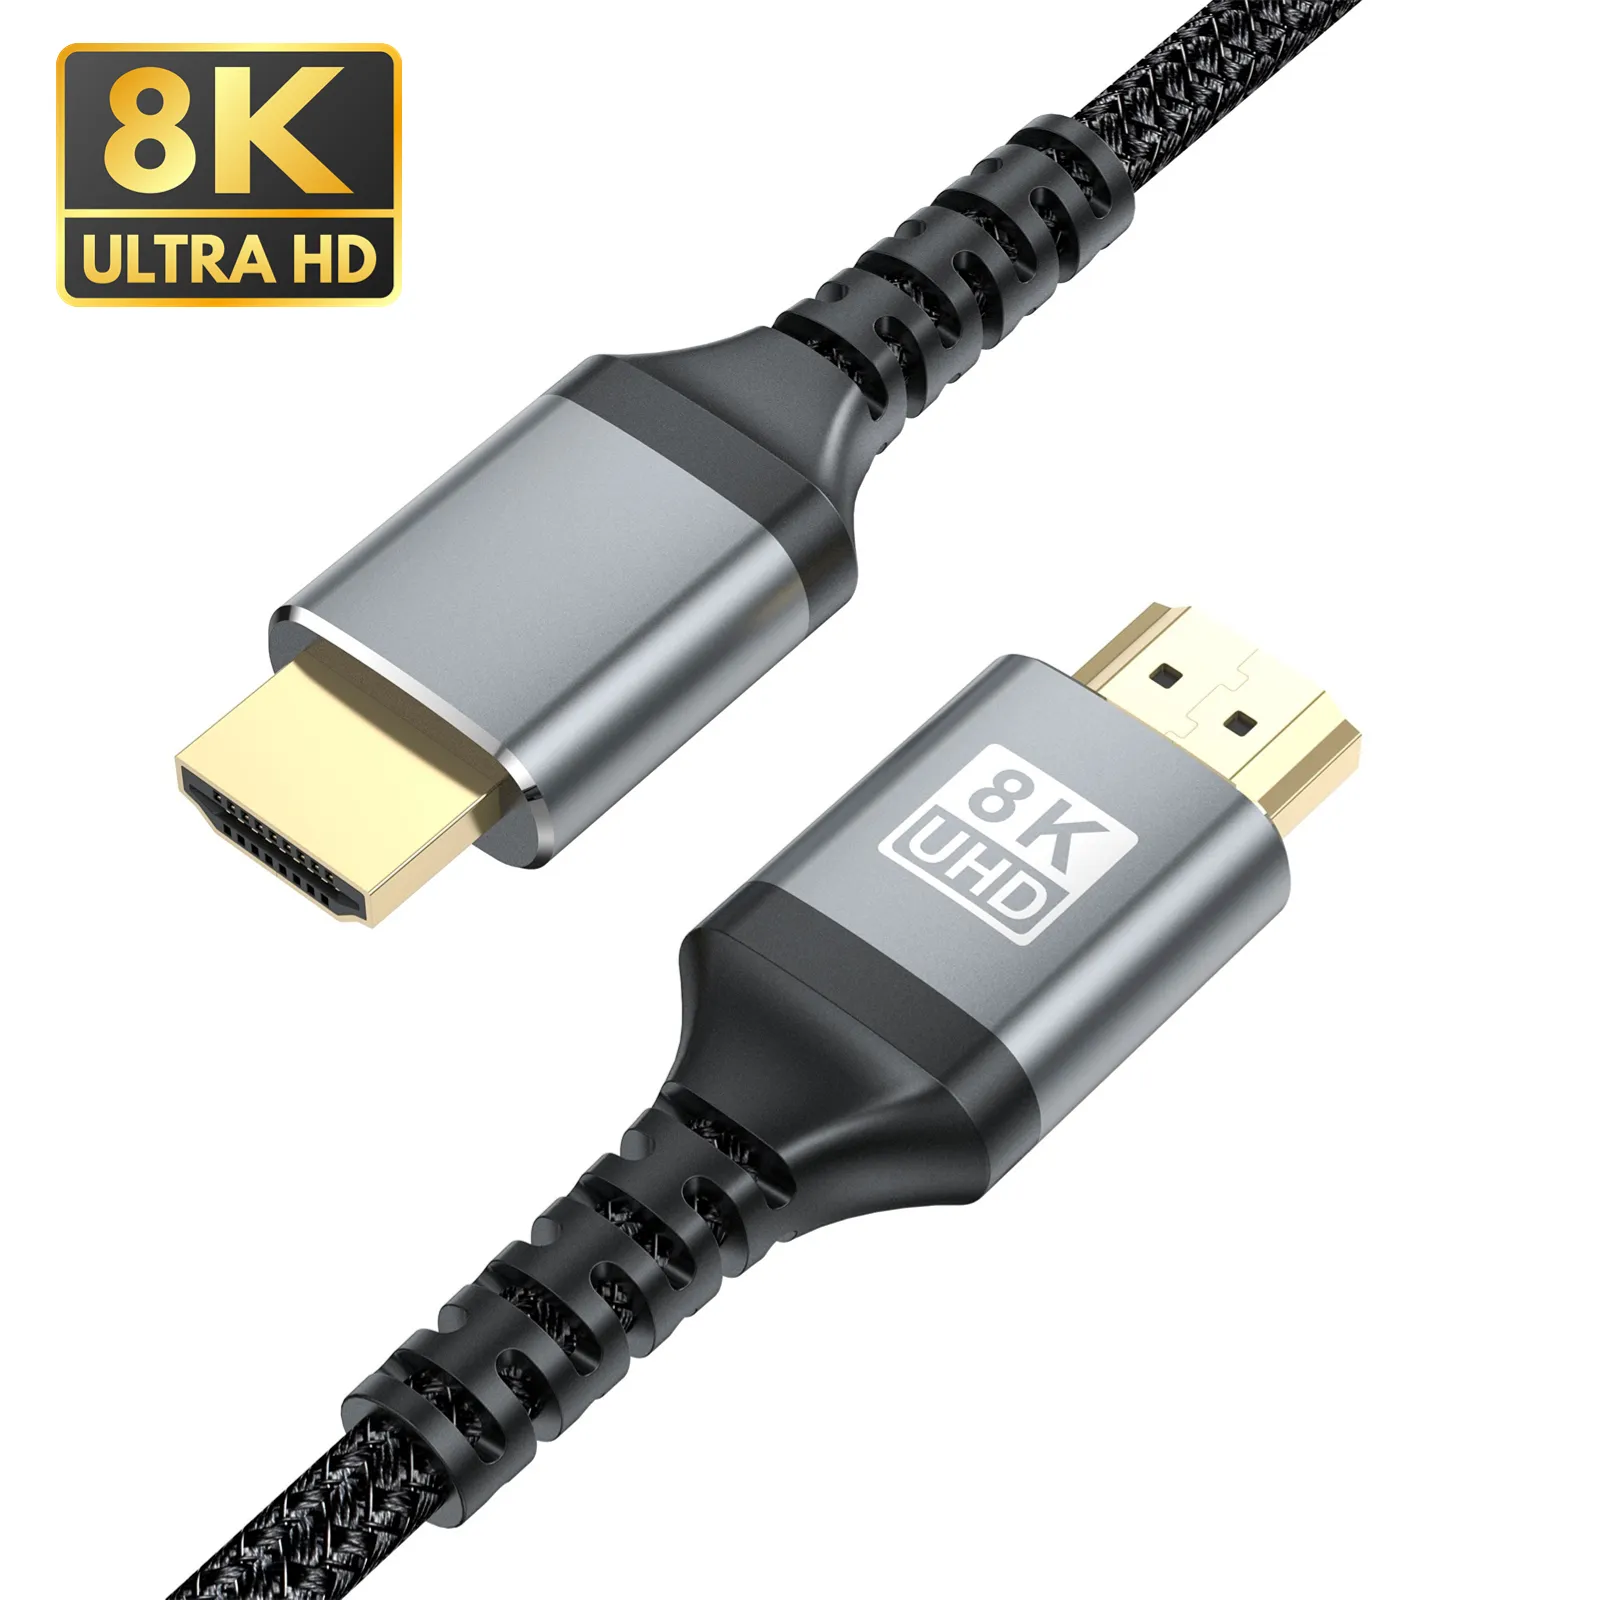 8K HDMI Cable 8K 60HZ 4K 120HZ HDMI Cable Support 3D 48Gbps high speed transmission for HDTV Projector PC HDMI cable 4K